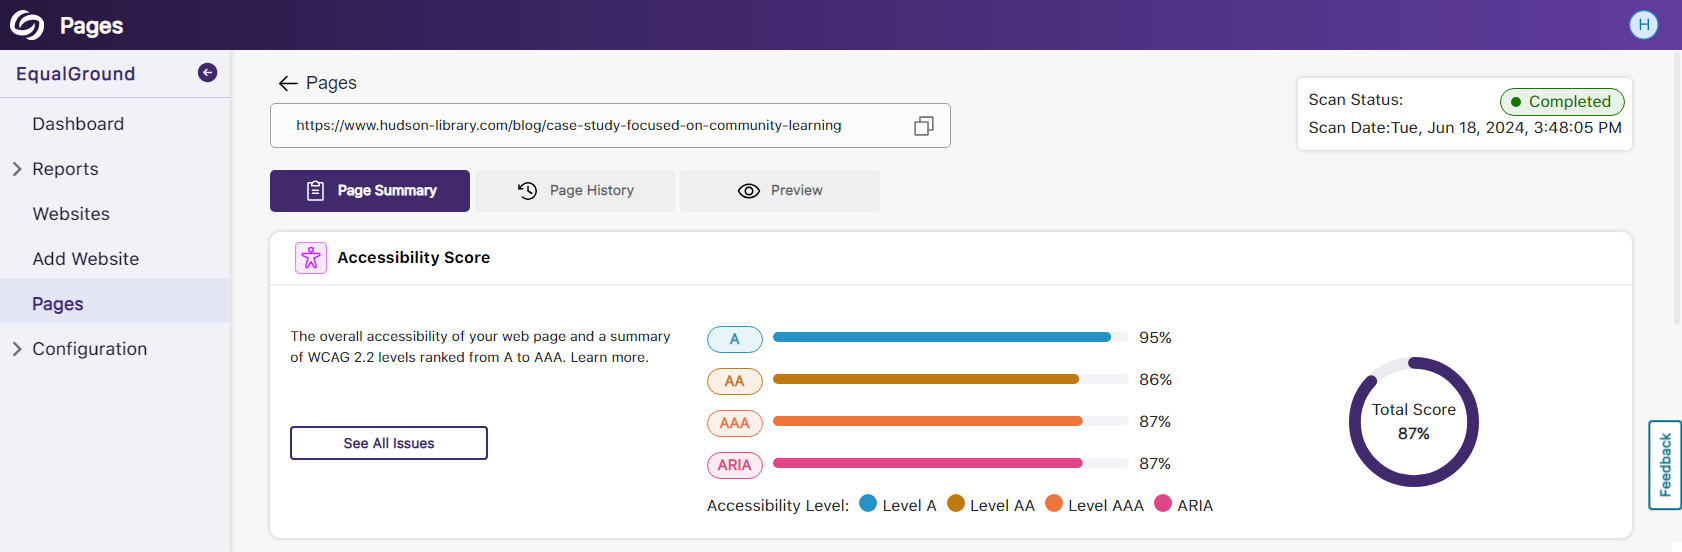 the page summary showing accessibility scores for A, AA, AAA, and aria issues.